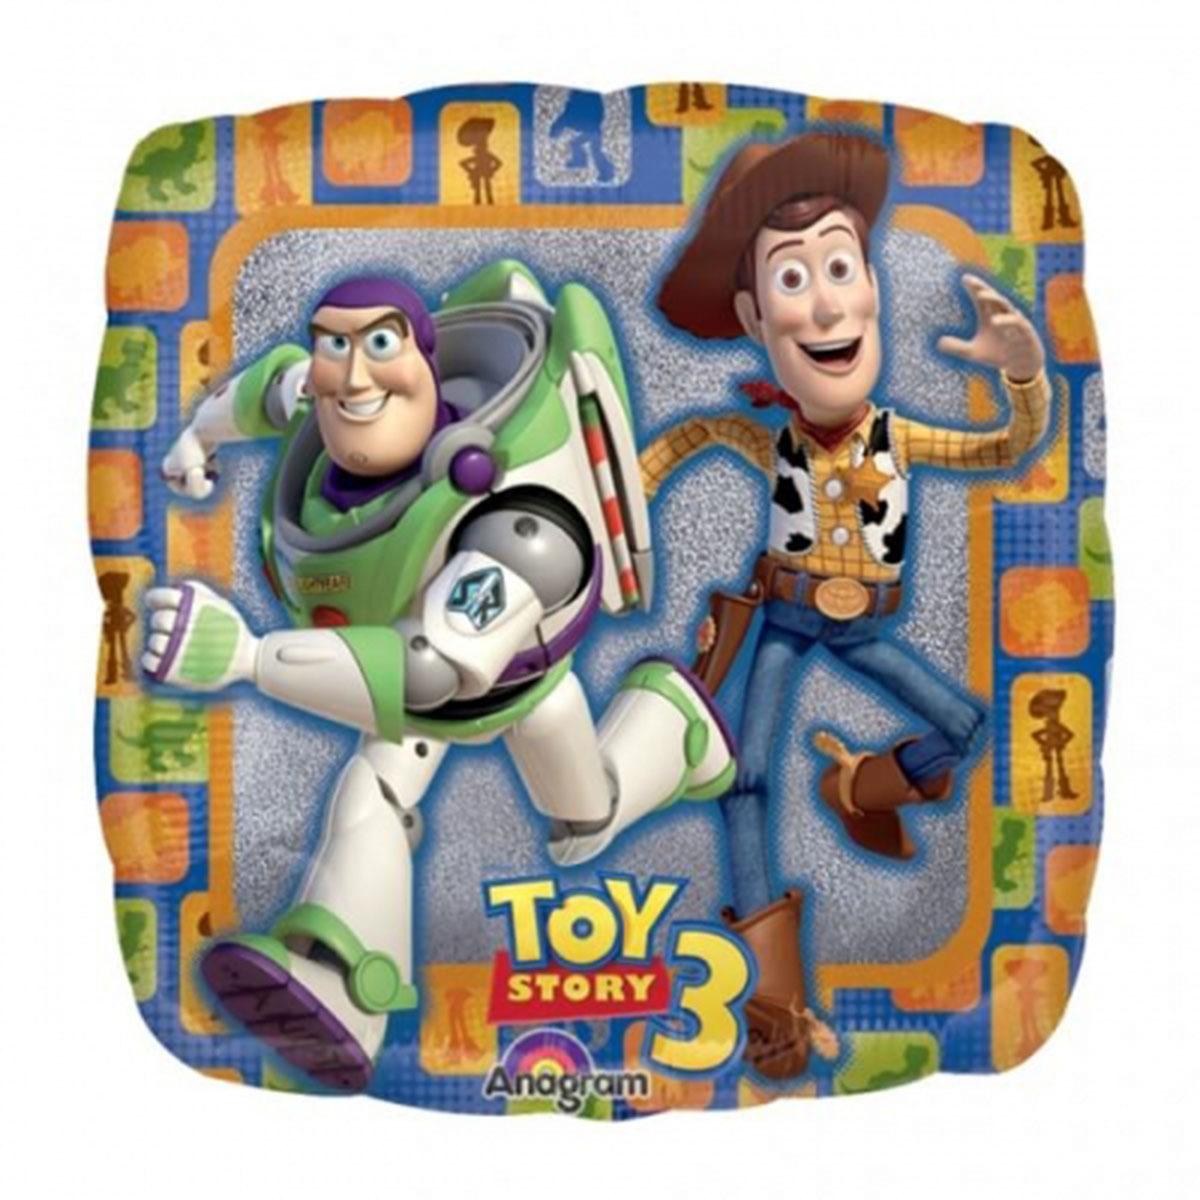 Toy Story 3 Group Holographic Balloon 18in Balloons & Streamers - Party Centre